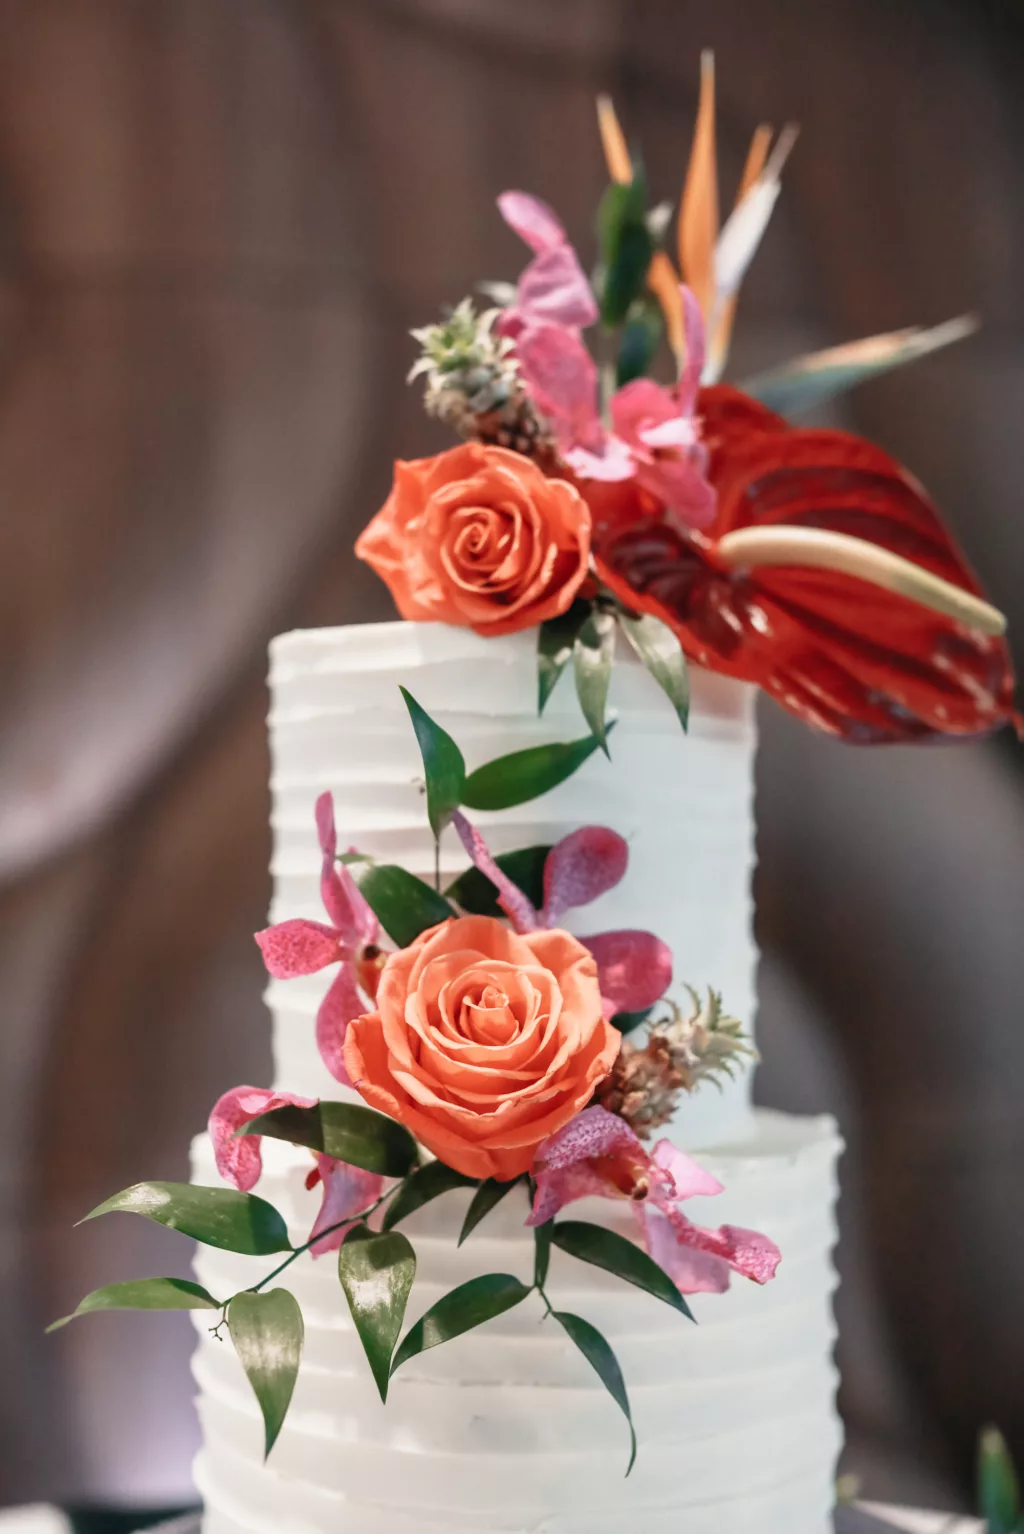 Two-Tiered Round Wedding Cake with Textured Buttercream and Tropical Summer Orange Roses, Pink Bougainvillea, and Anthurium Flower Accents | Tampa Bay Florist Save The Date Florida